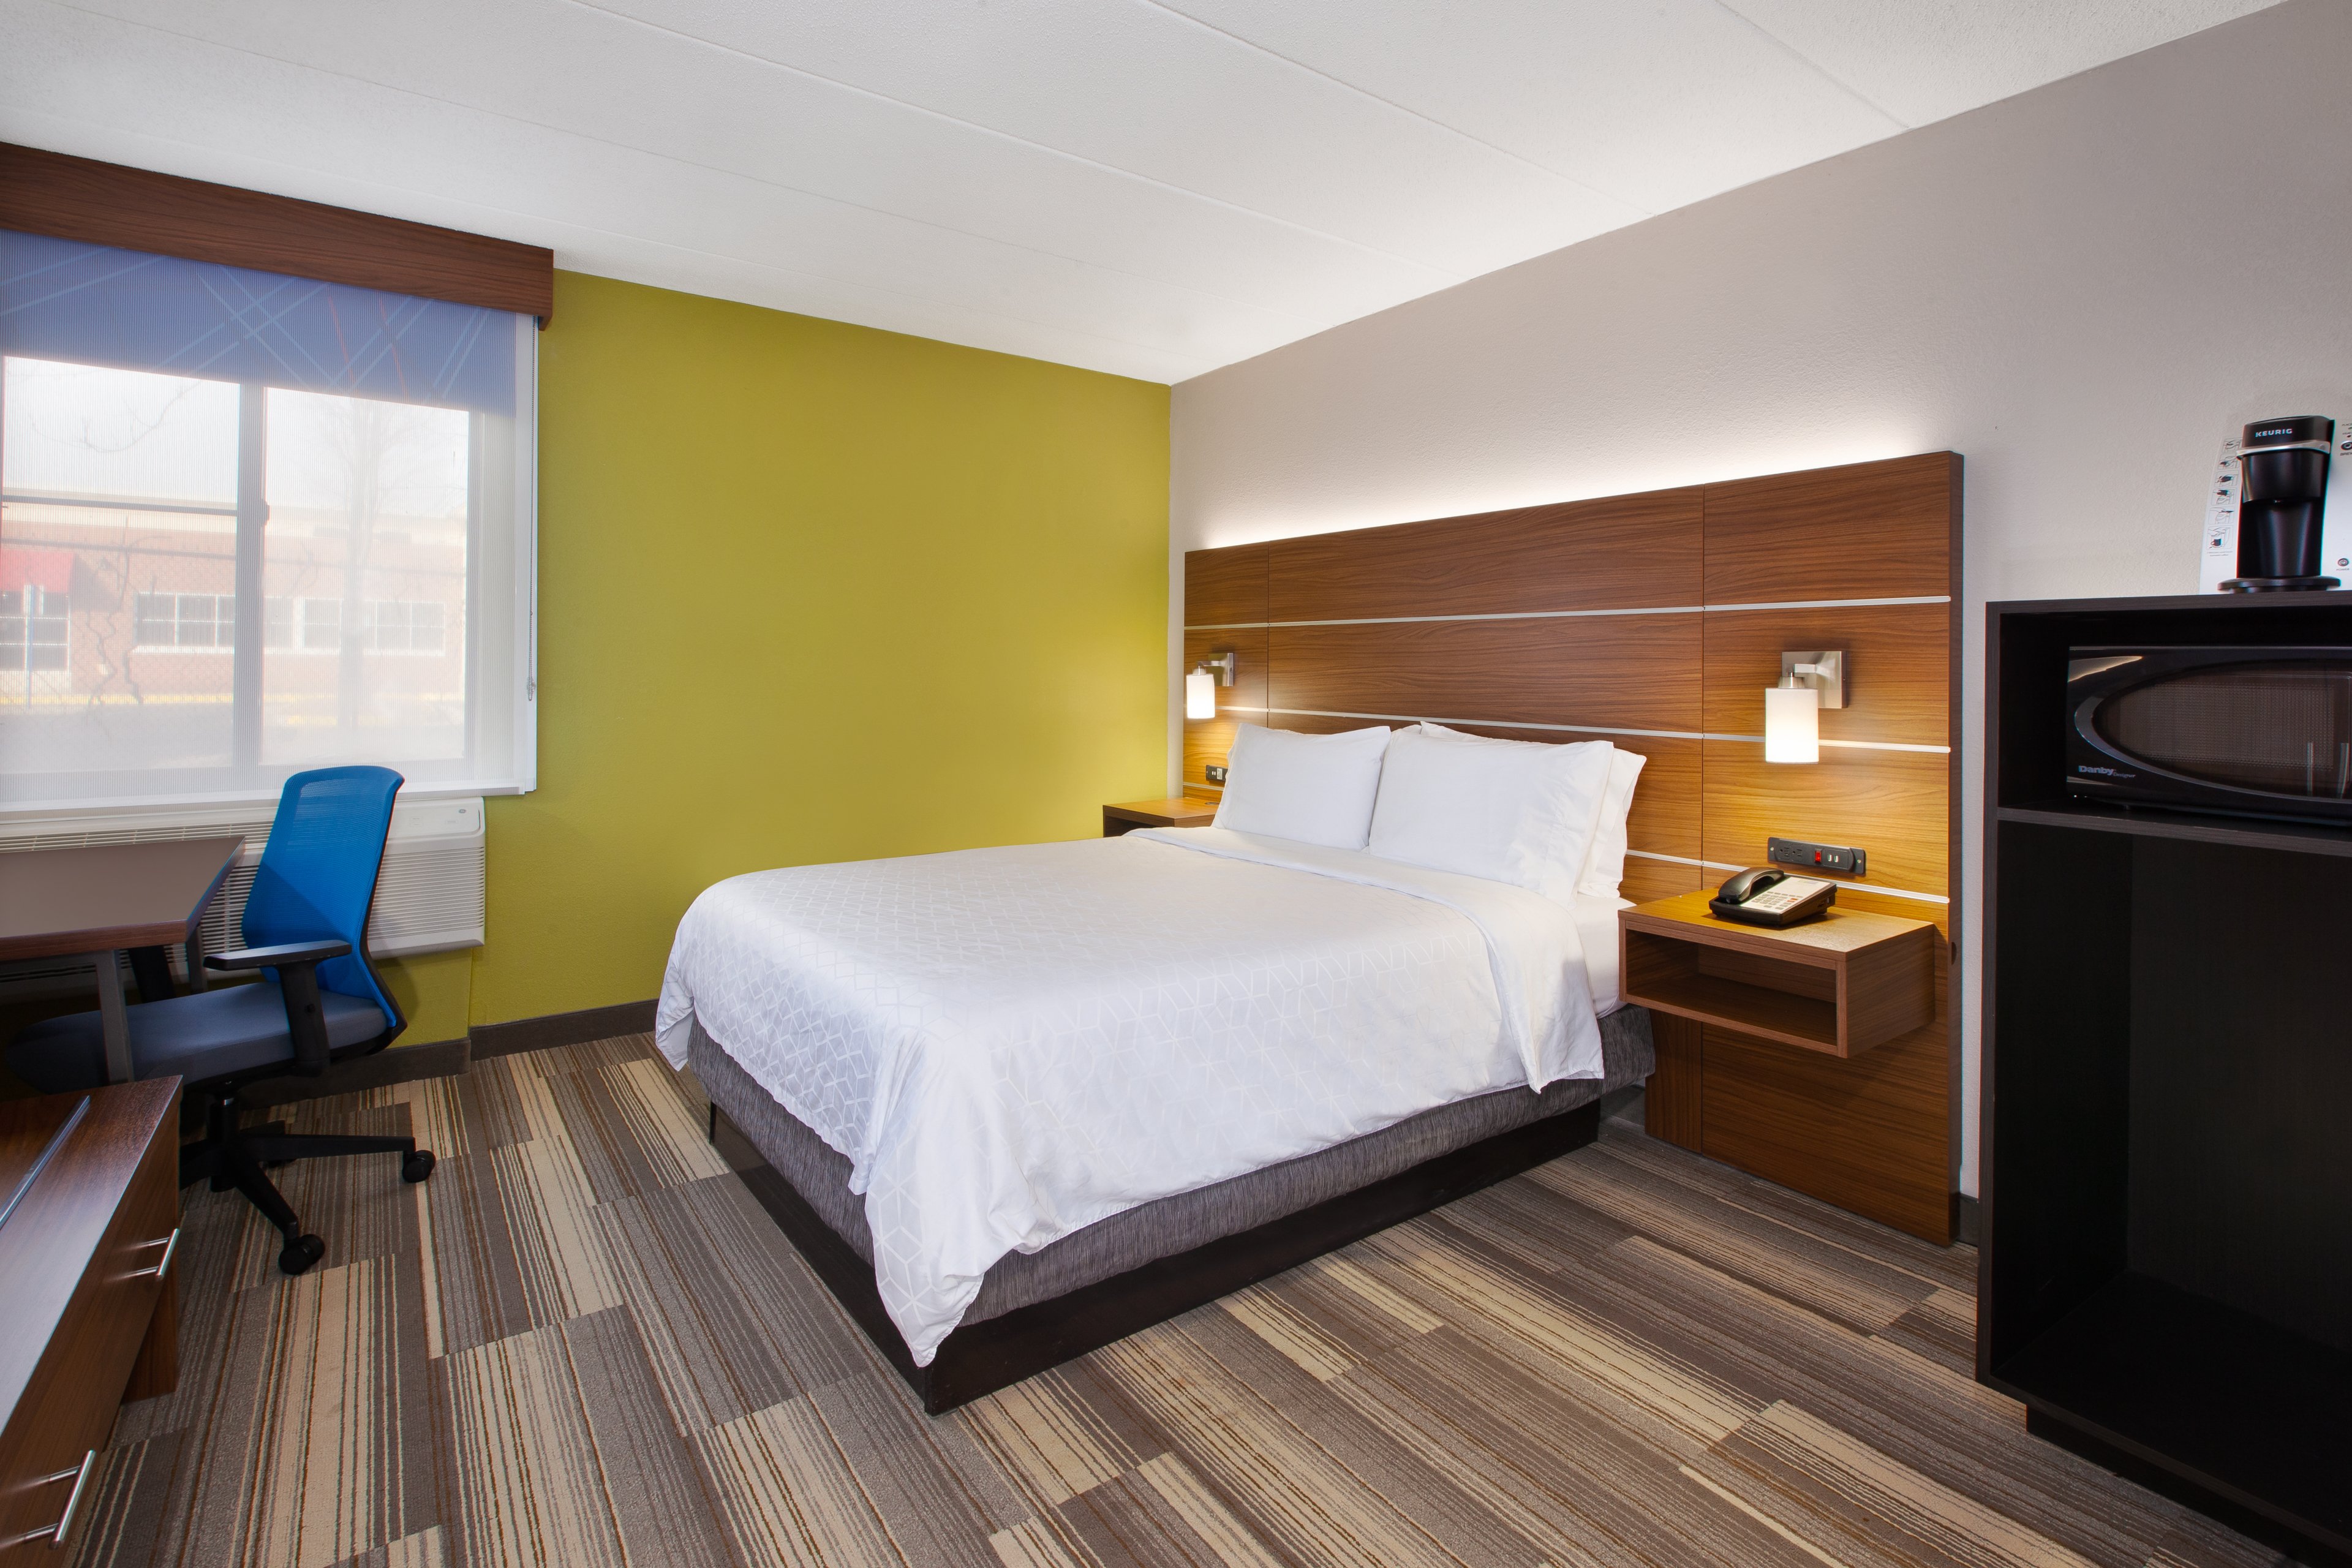 We offer you our spacious ADA compliant King Guest Room.